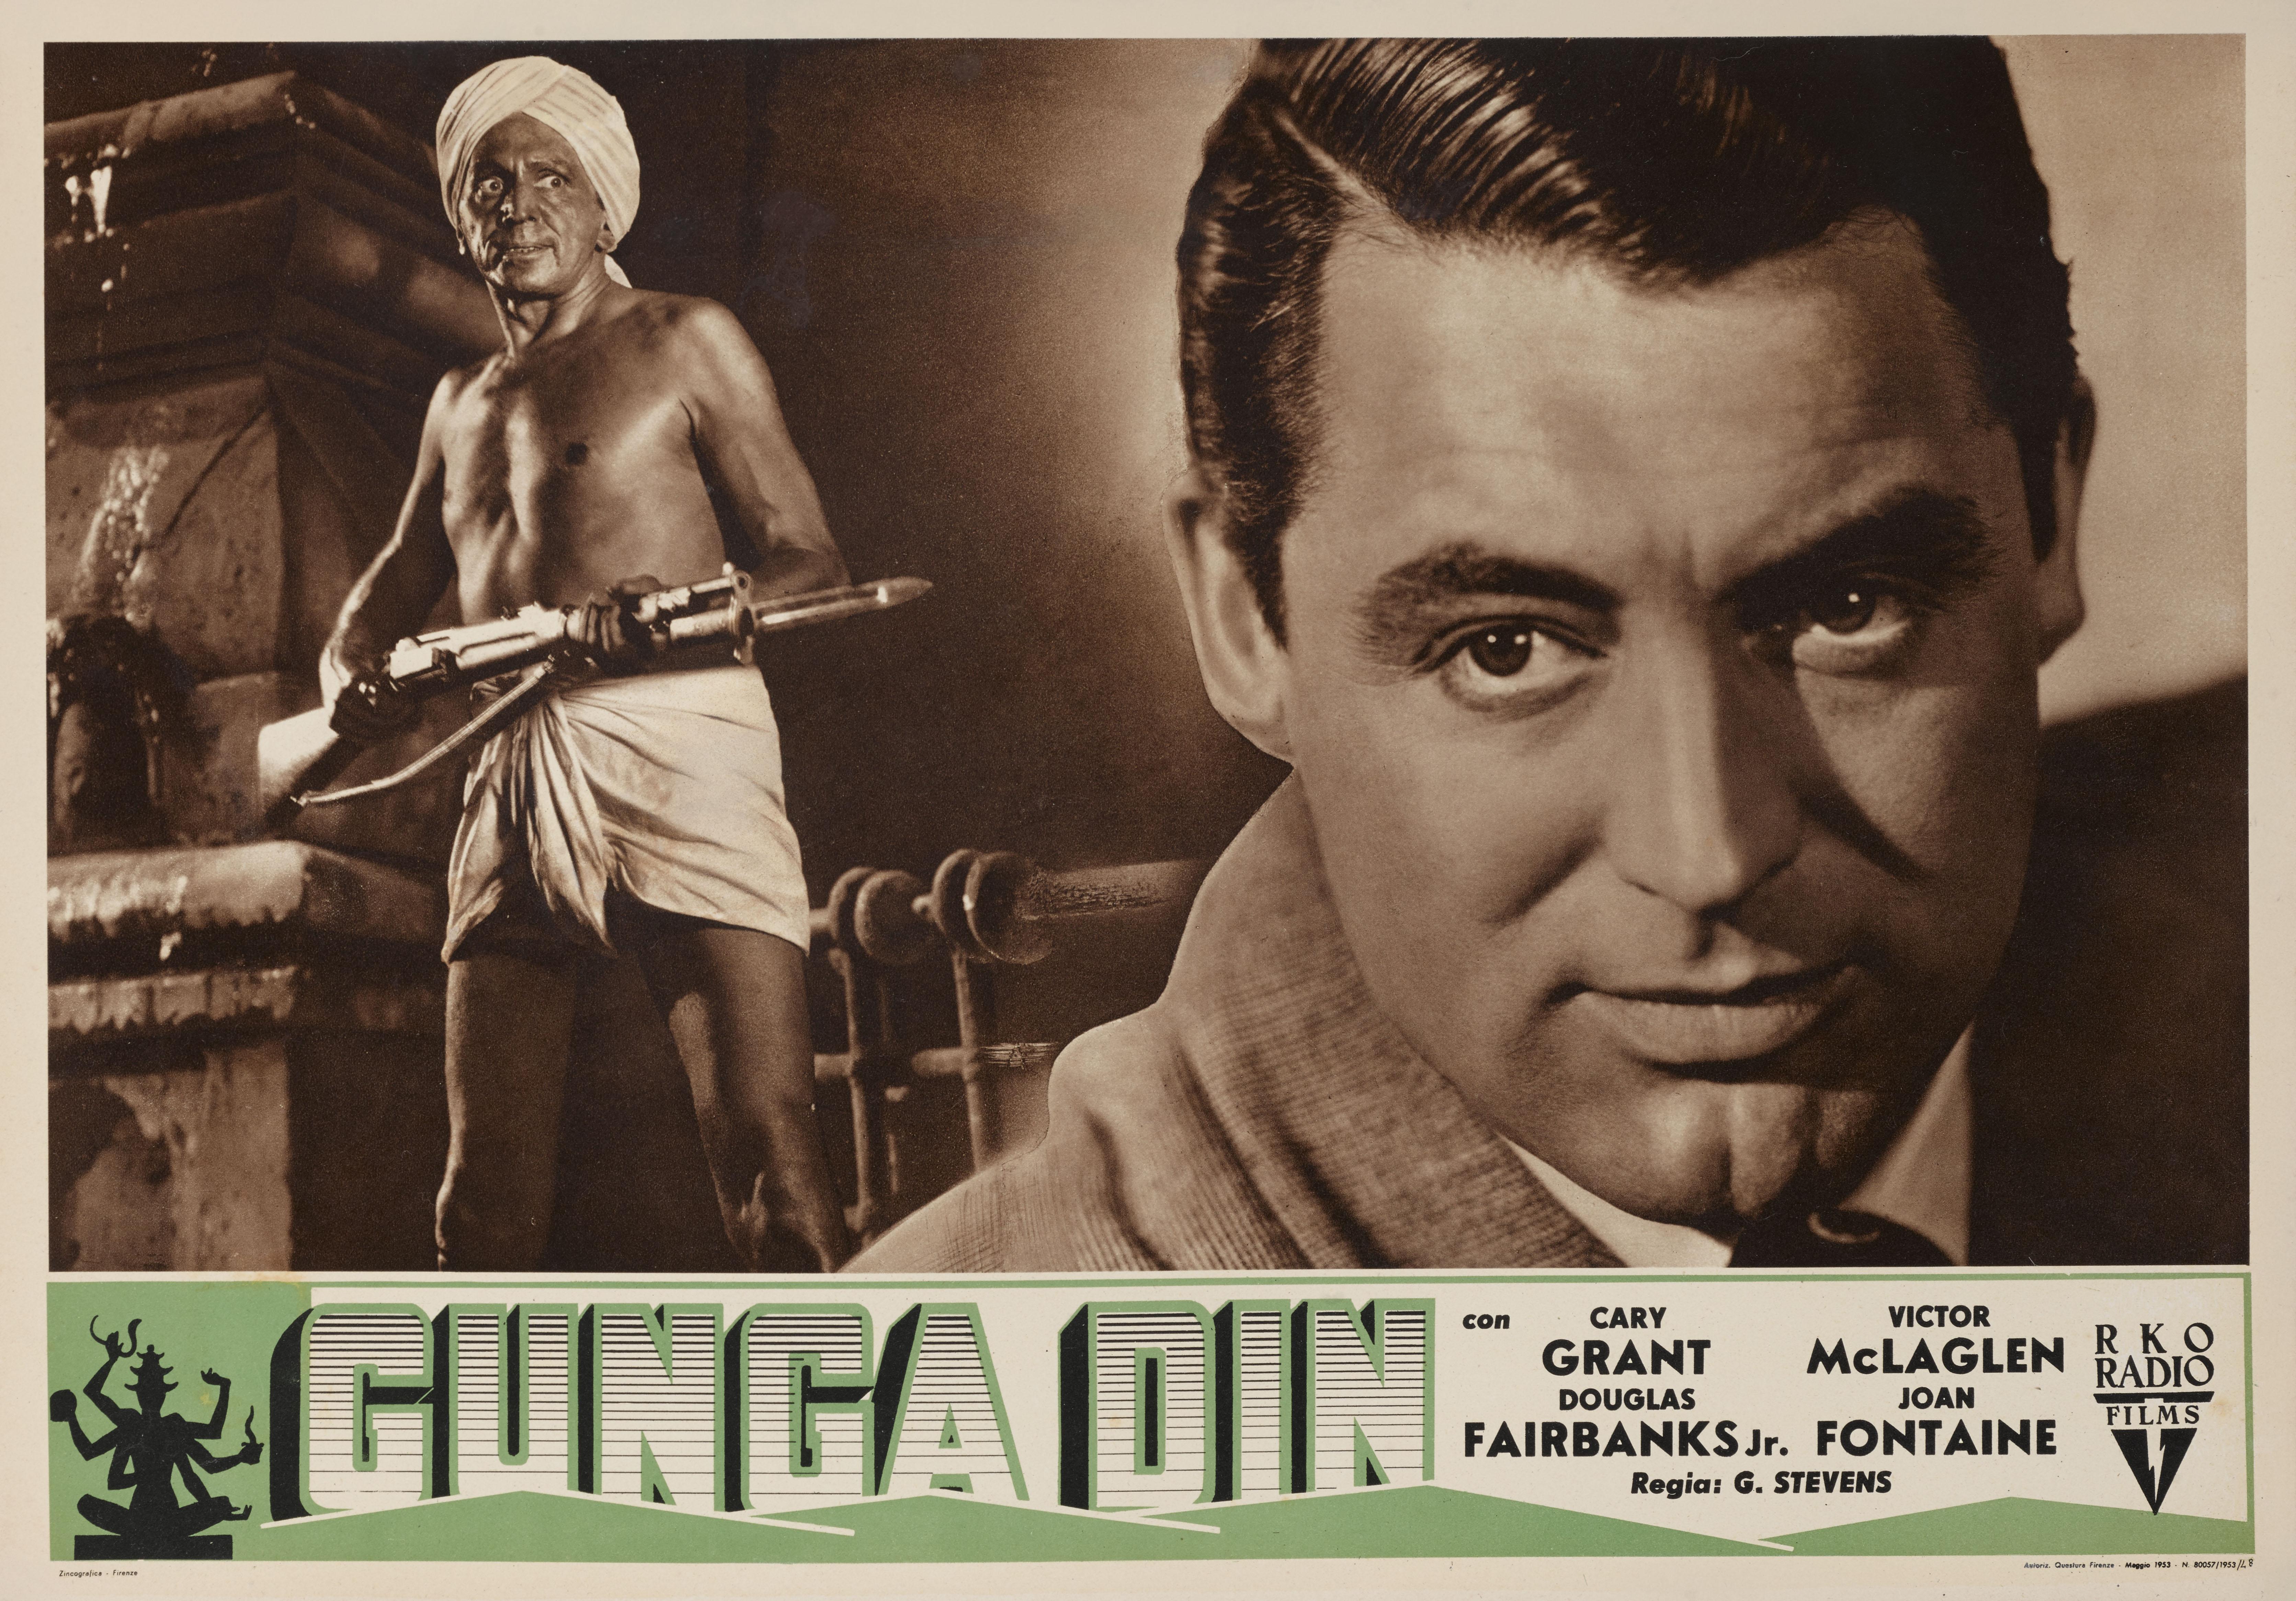 Original Italian film poster from the 1939 film that was directed by George Stevens and starred Cary Grant and Douglas Fairbanks Jr.
This poster is unfolded and linen backed and in excellent condition, with the colour remaining very bright.
The